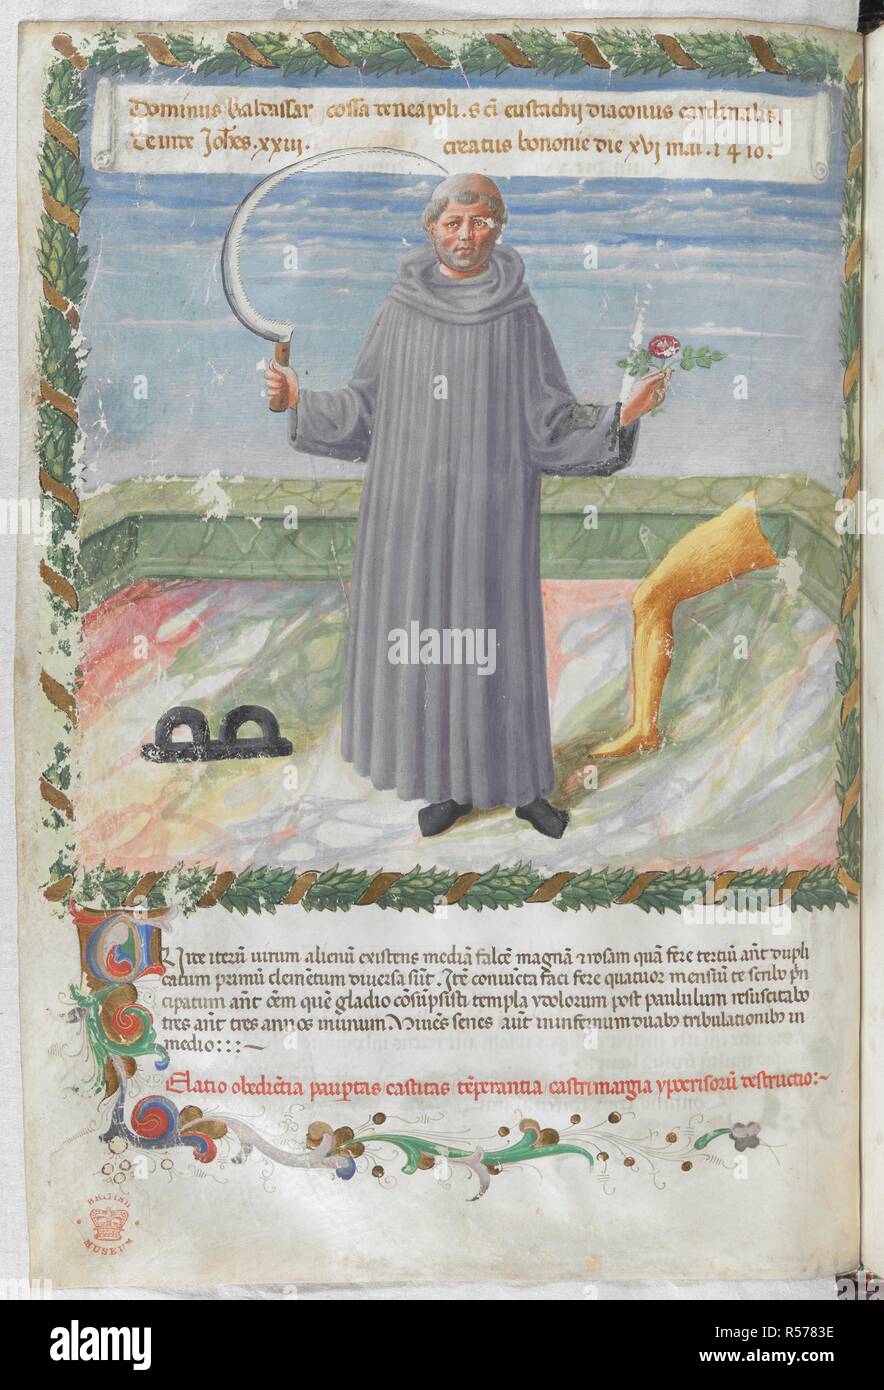 Miniature of Pope John XXII (the caption, identifying the figure as Pope John XXIII, is erroneous). Vaticinia de Pontificibus. Italy, Central (Florence); 2nd quarter of the 15th century. Source: Harley 1340, f.10v. Language: Latin. Stock Photo